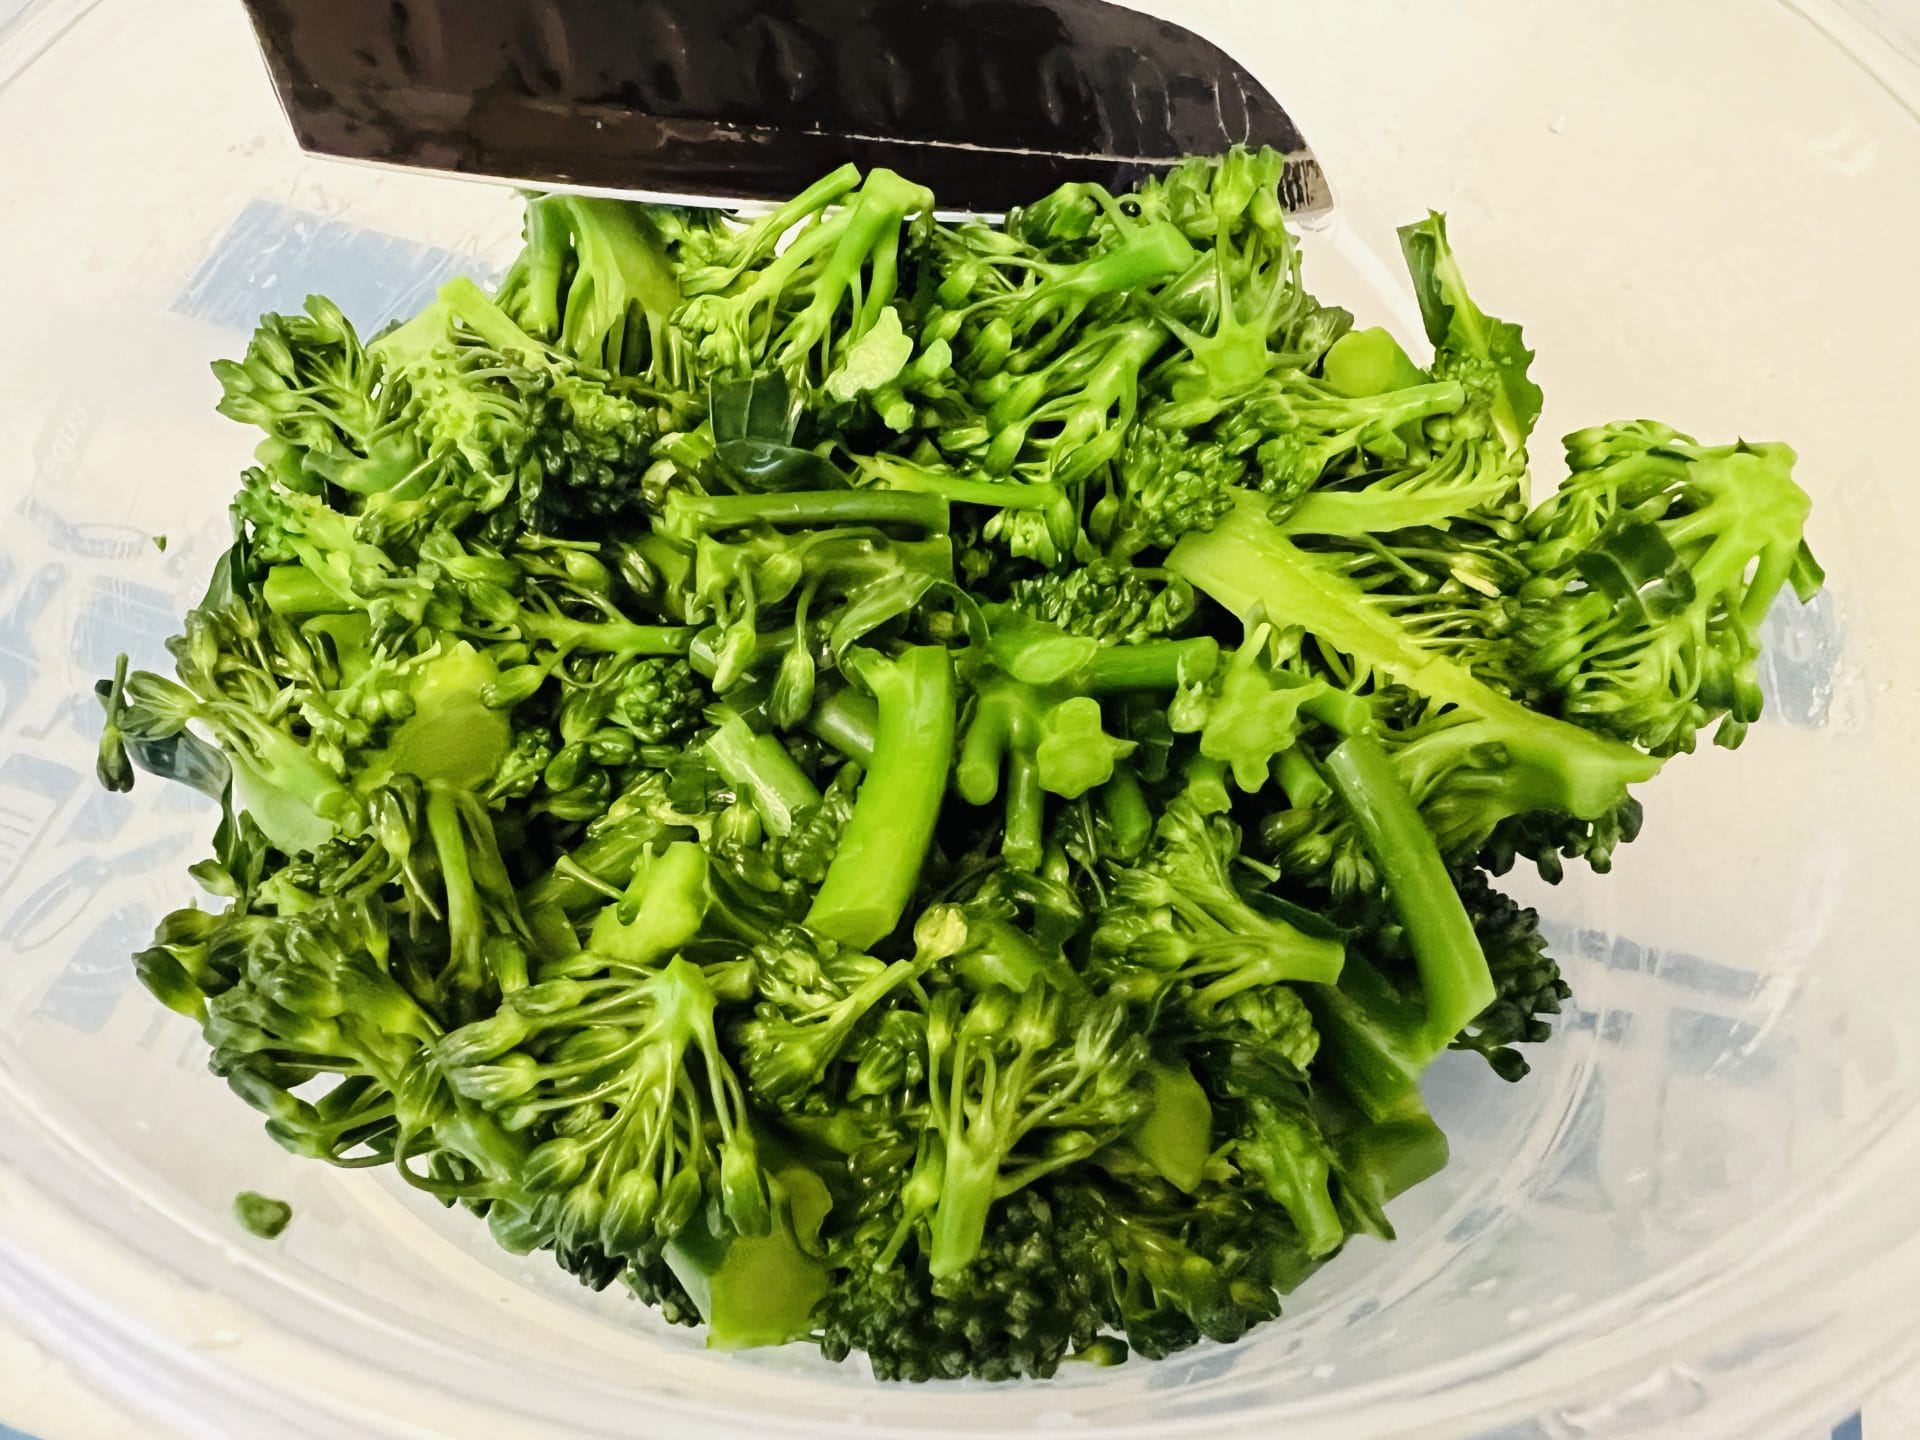 White Bean and Broccolini Salad can be made with brocolini too.